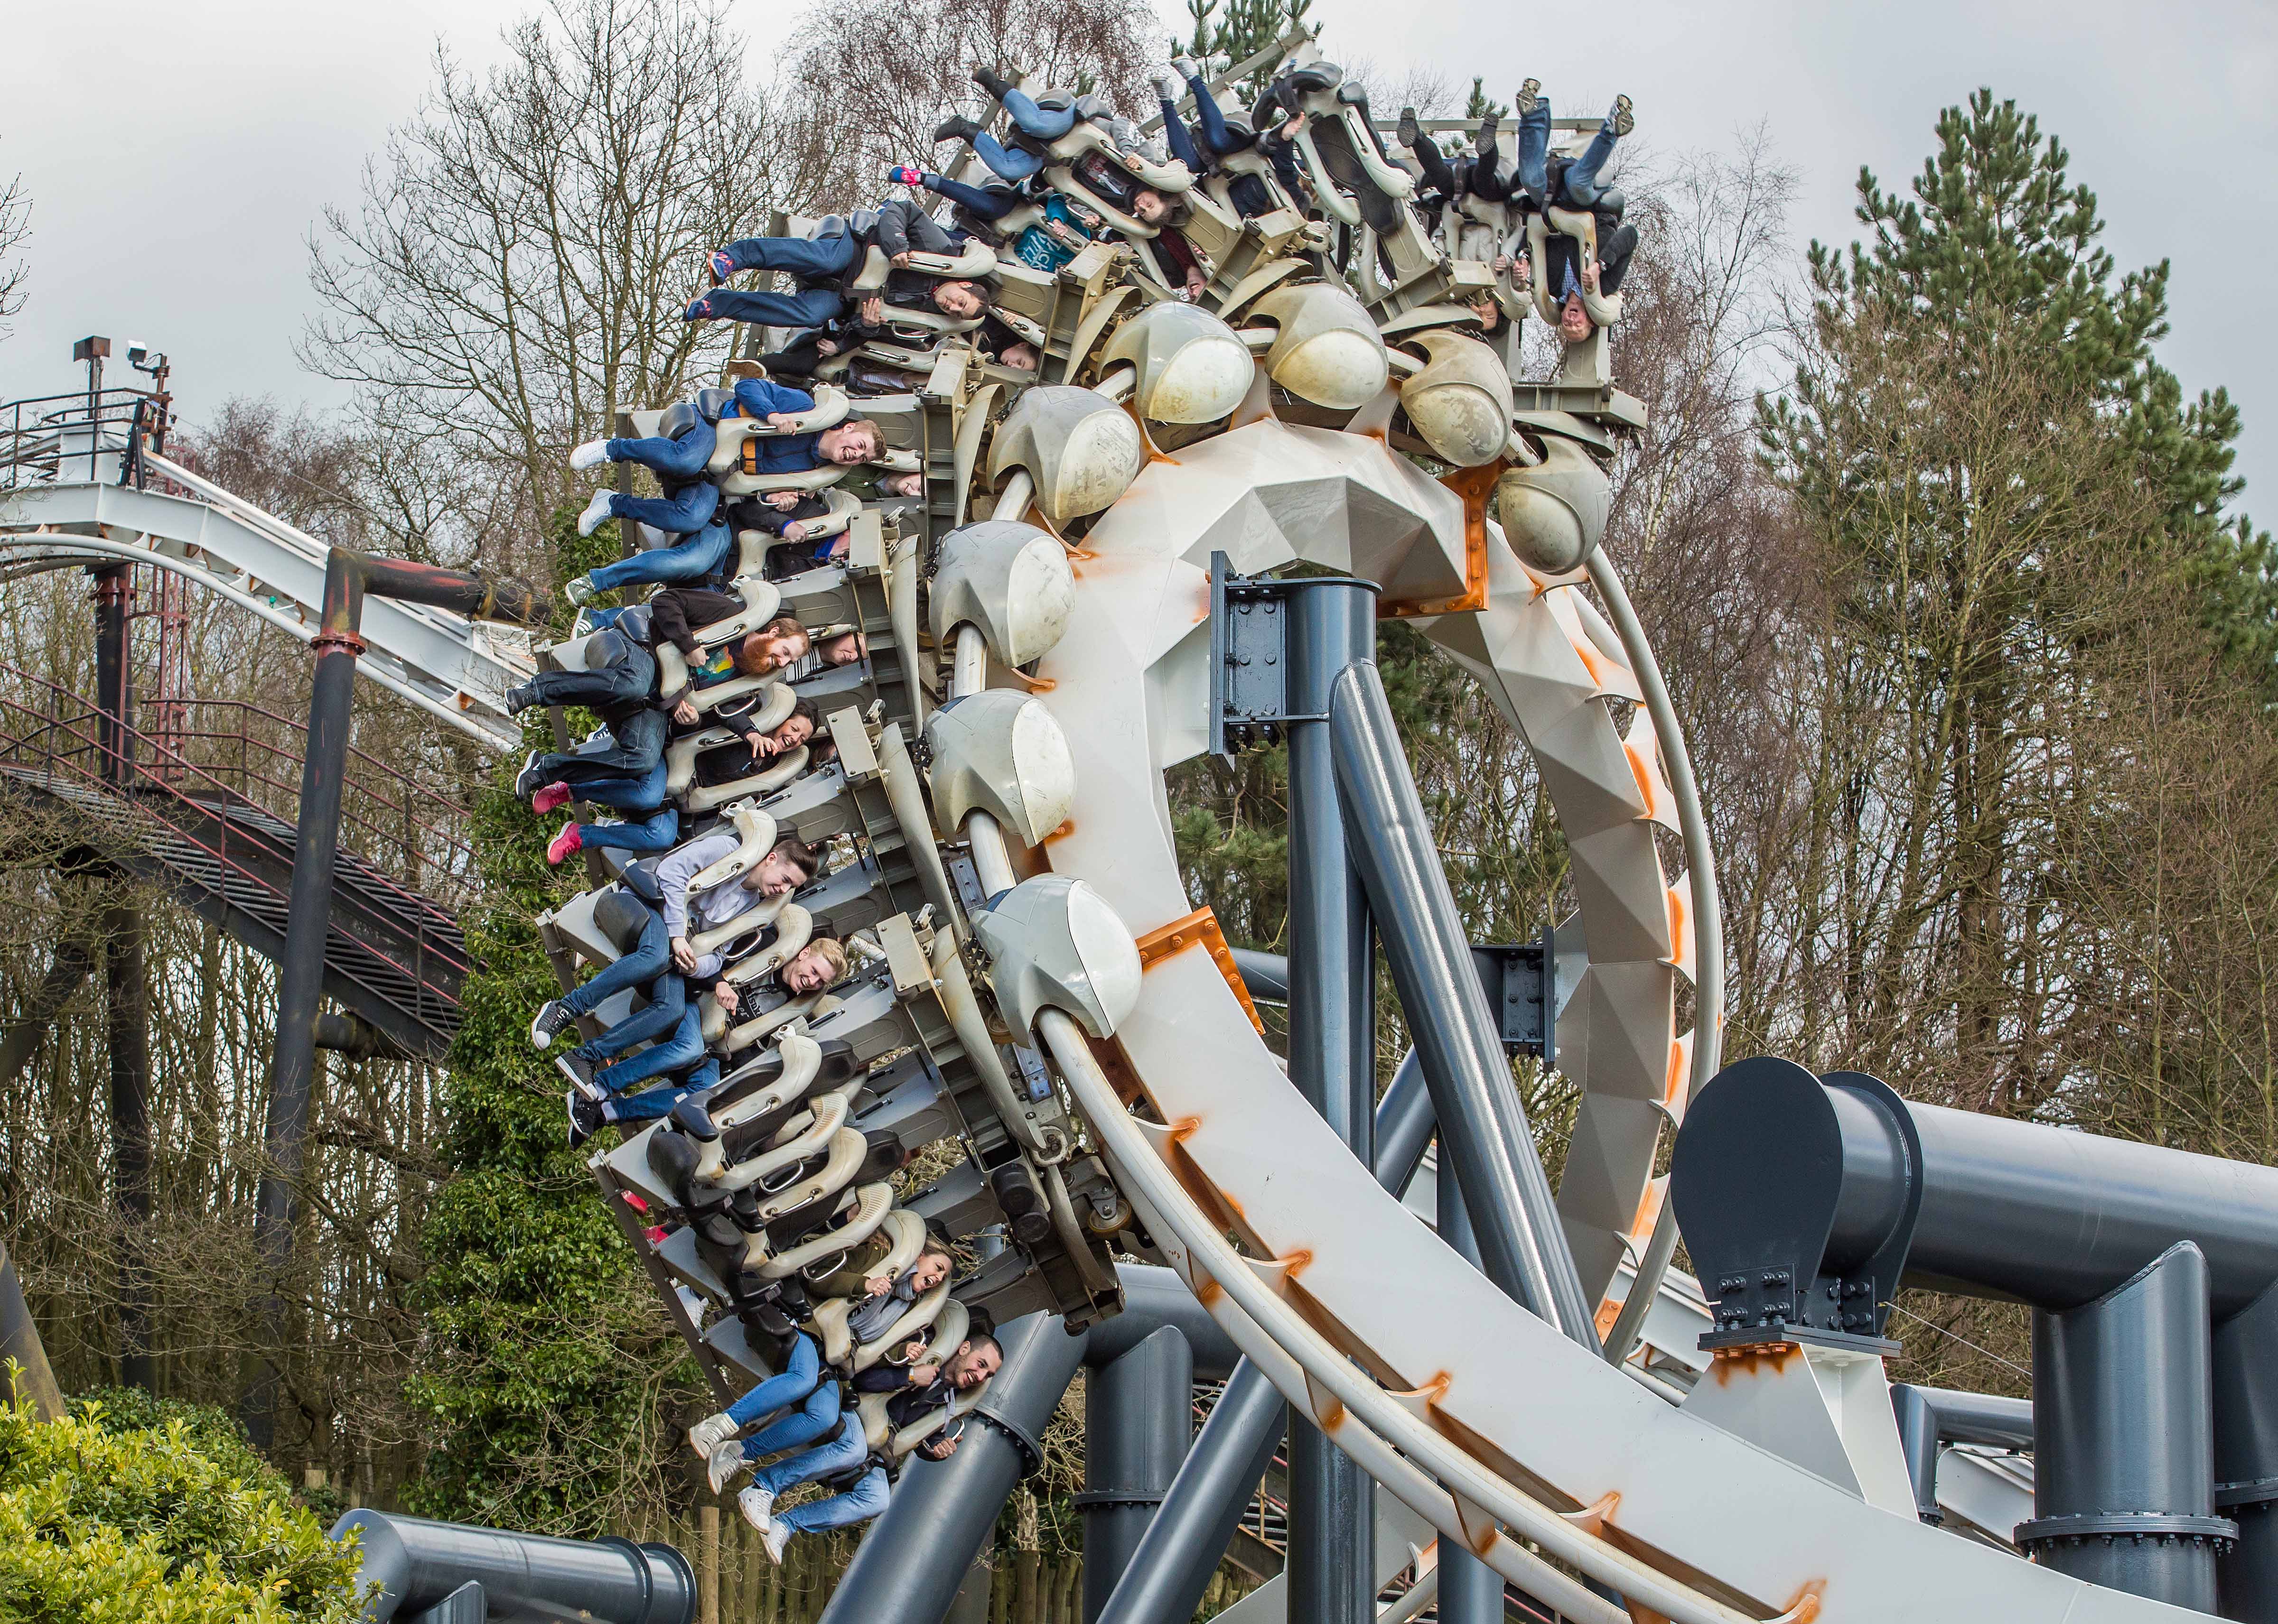 best time to visit alton towers